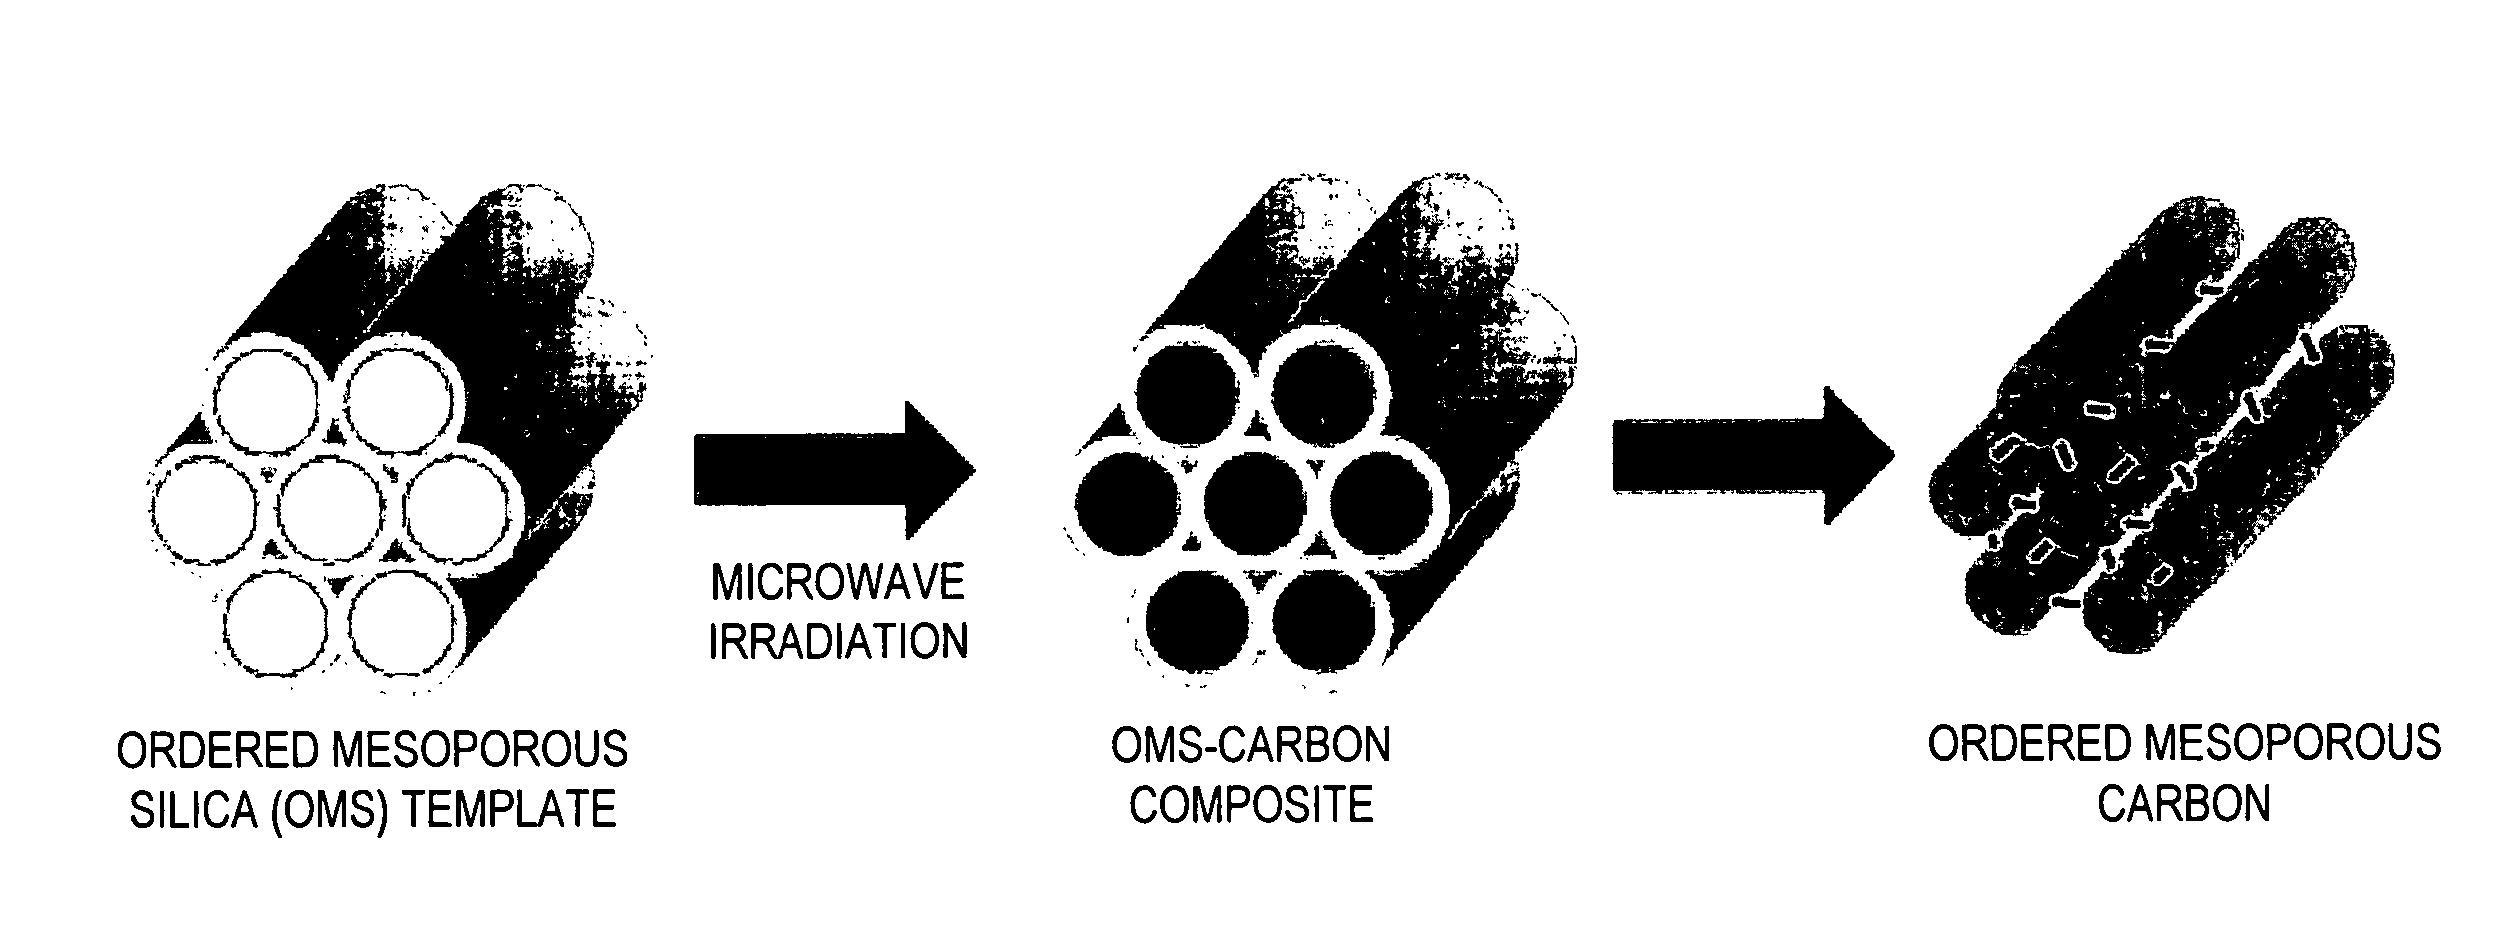 Mesoporous carbon, method of preparing the same, and fuel cell using the carbon